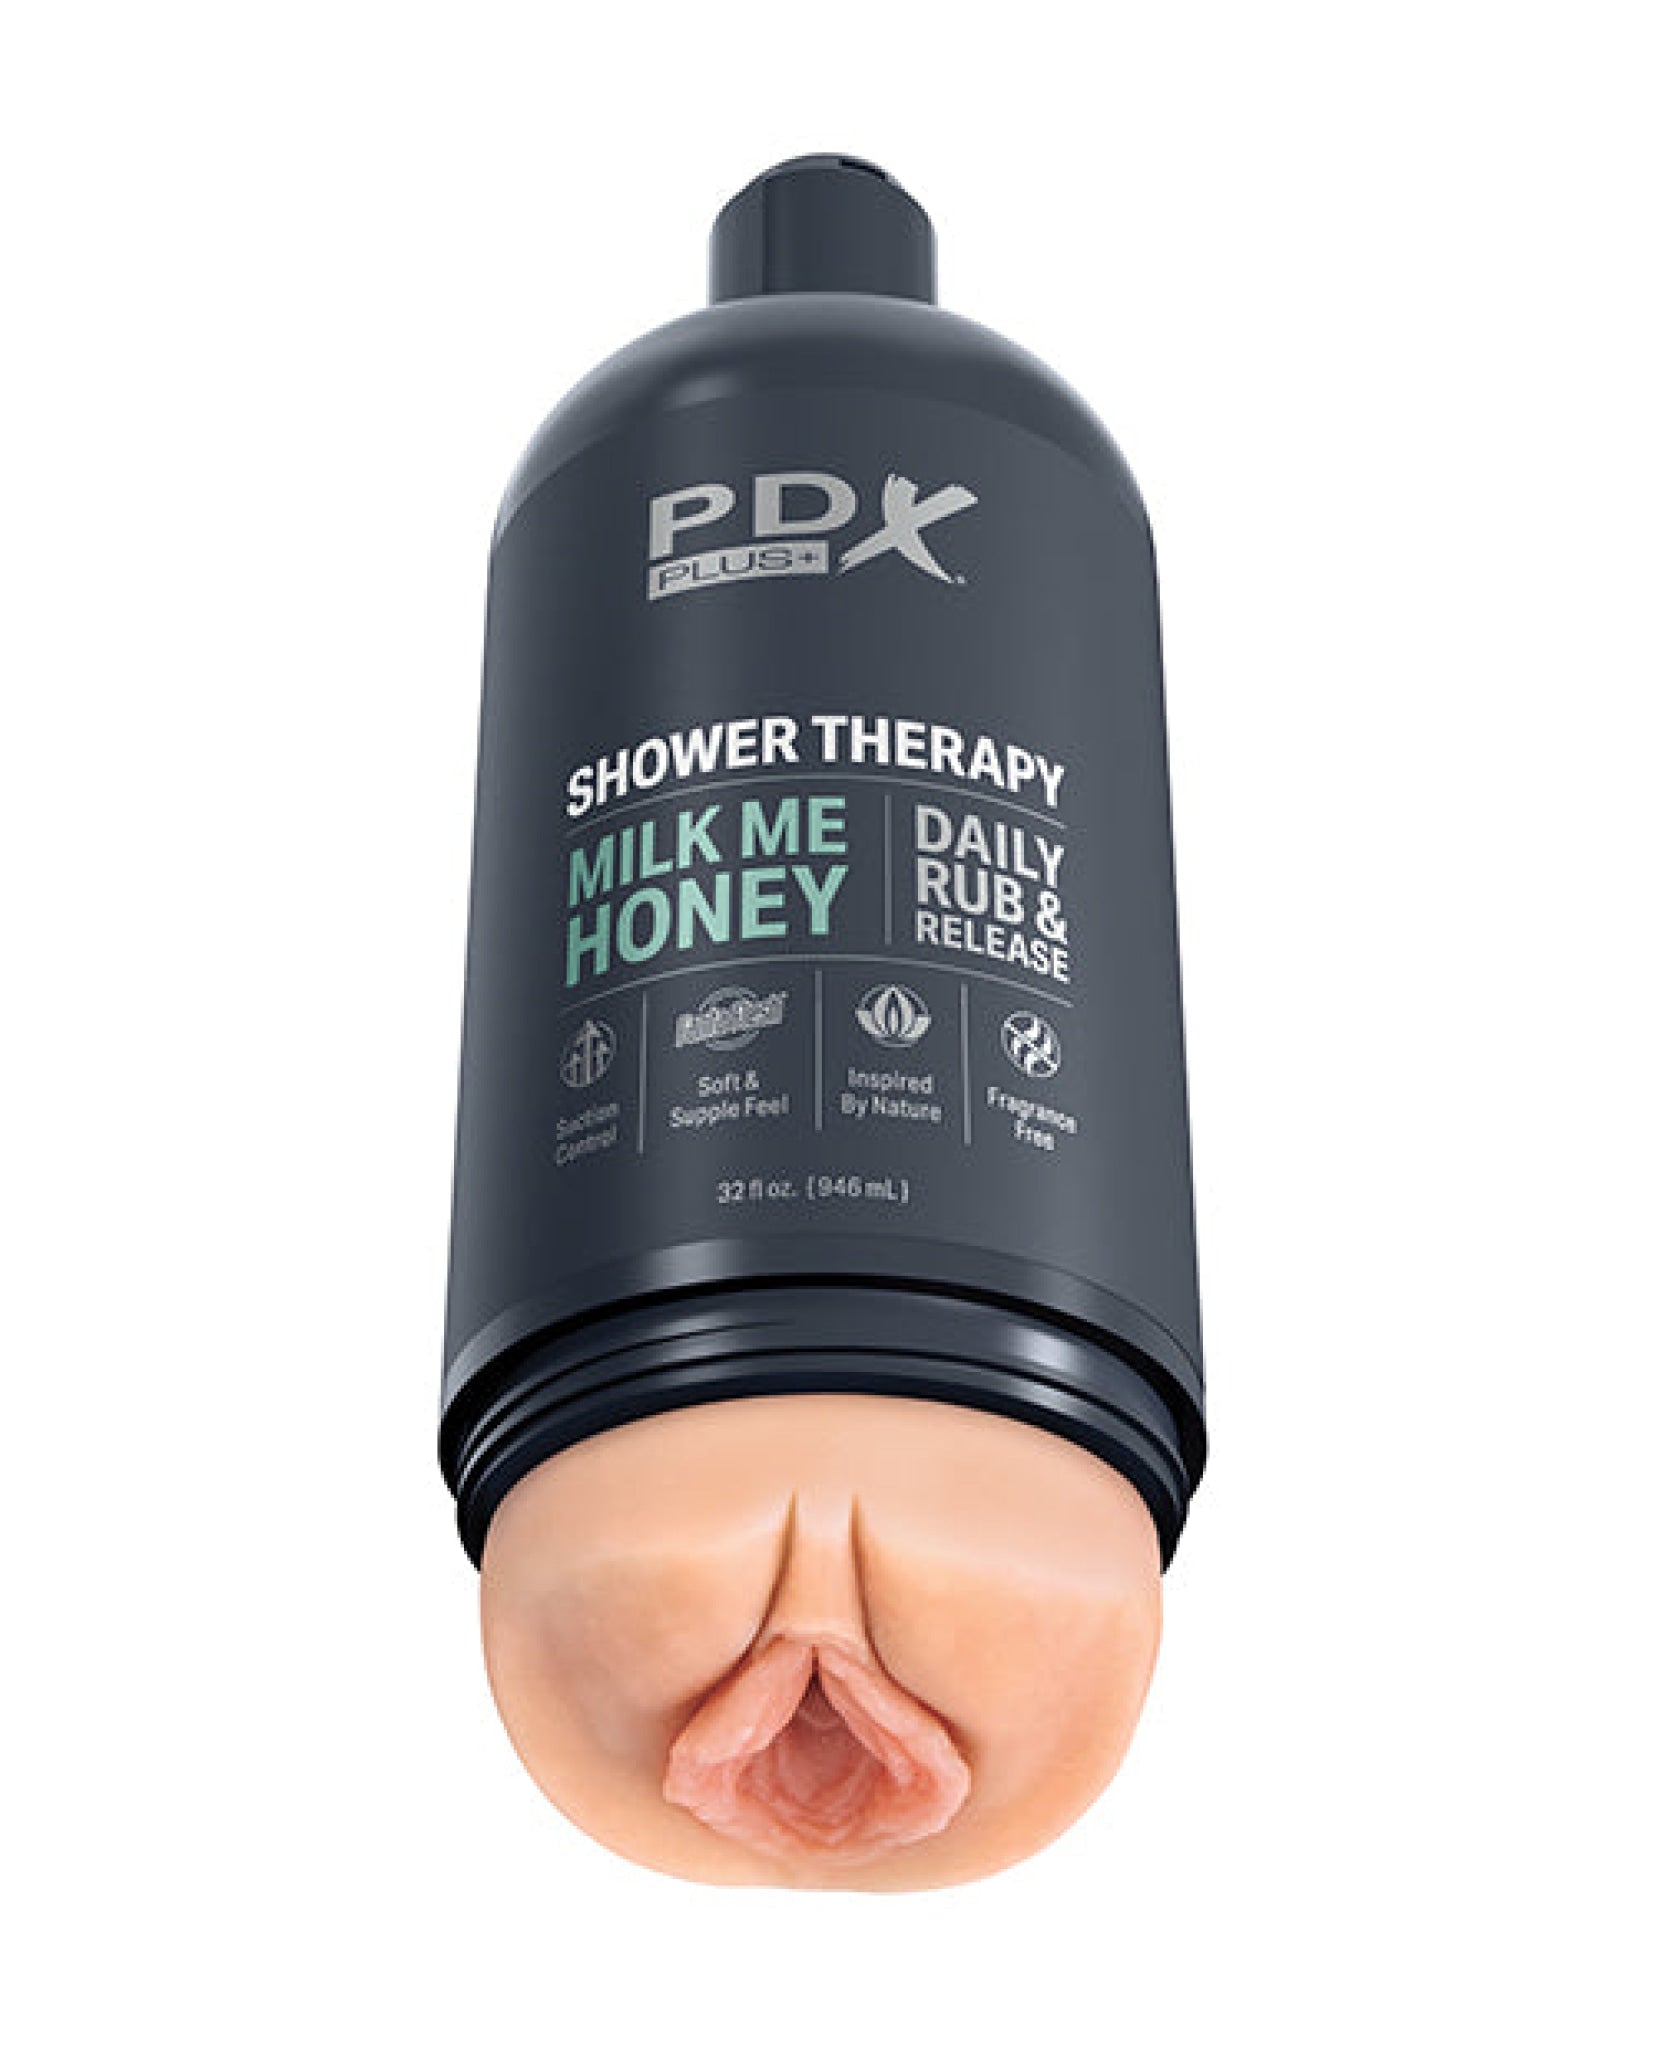 Pdx Plus Shower Therapy Milk Me Honey Pdx